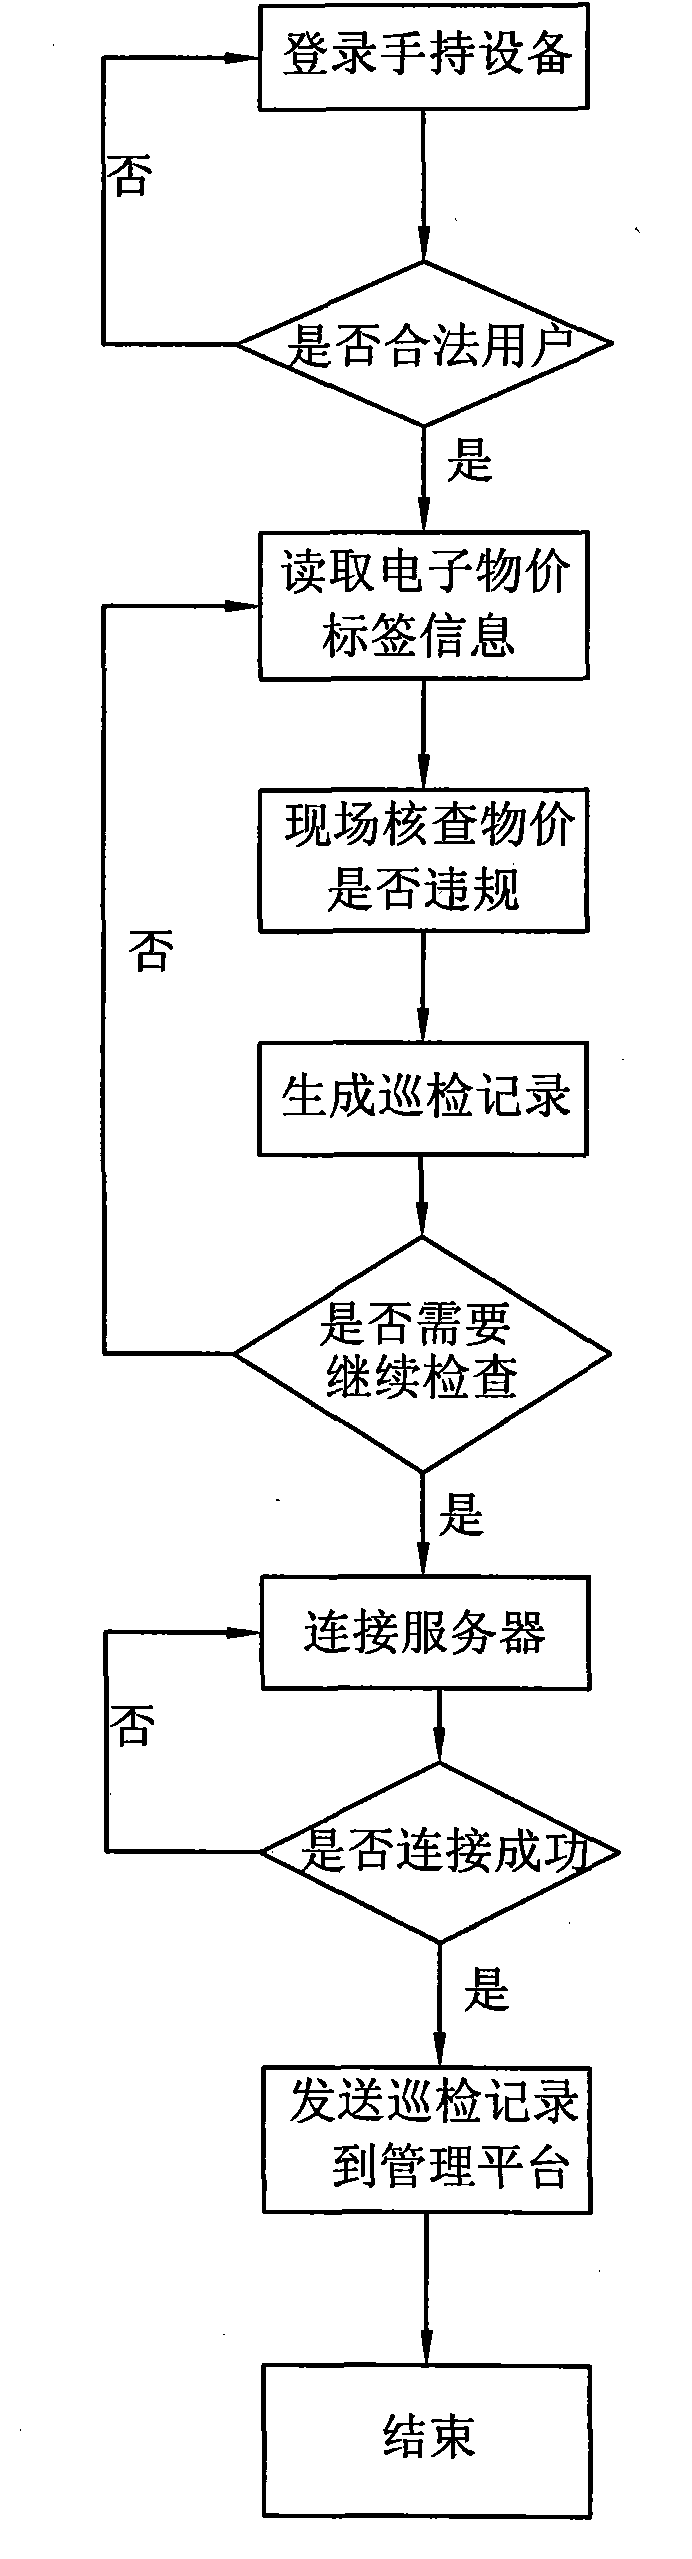 Routing inspection method for commodity price supervision